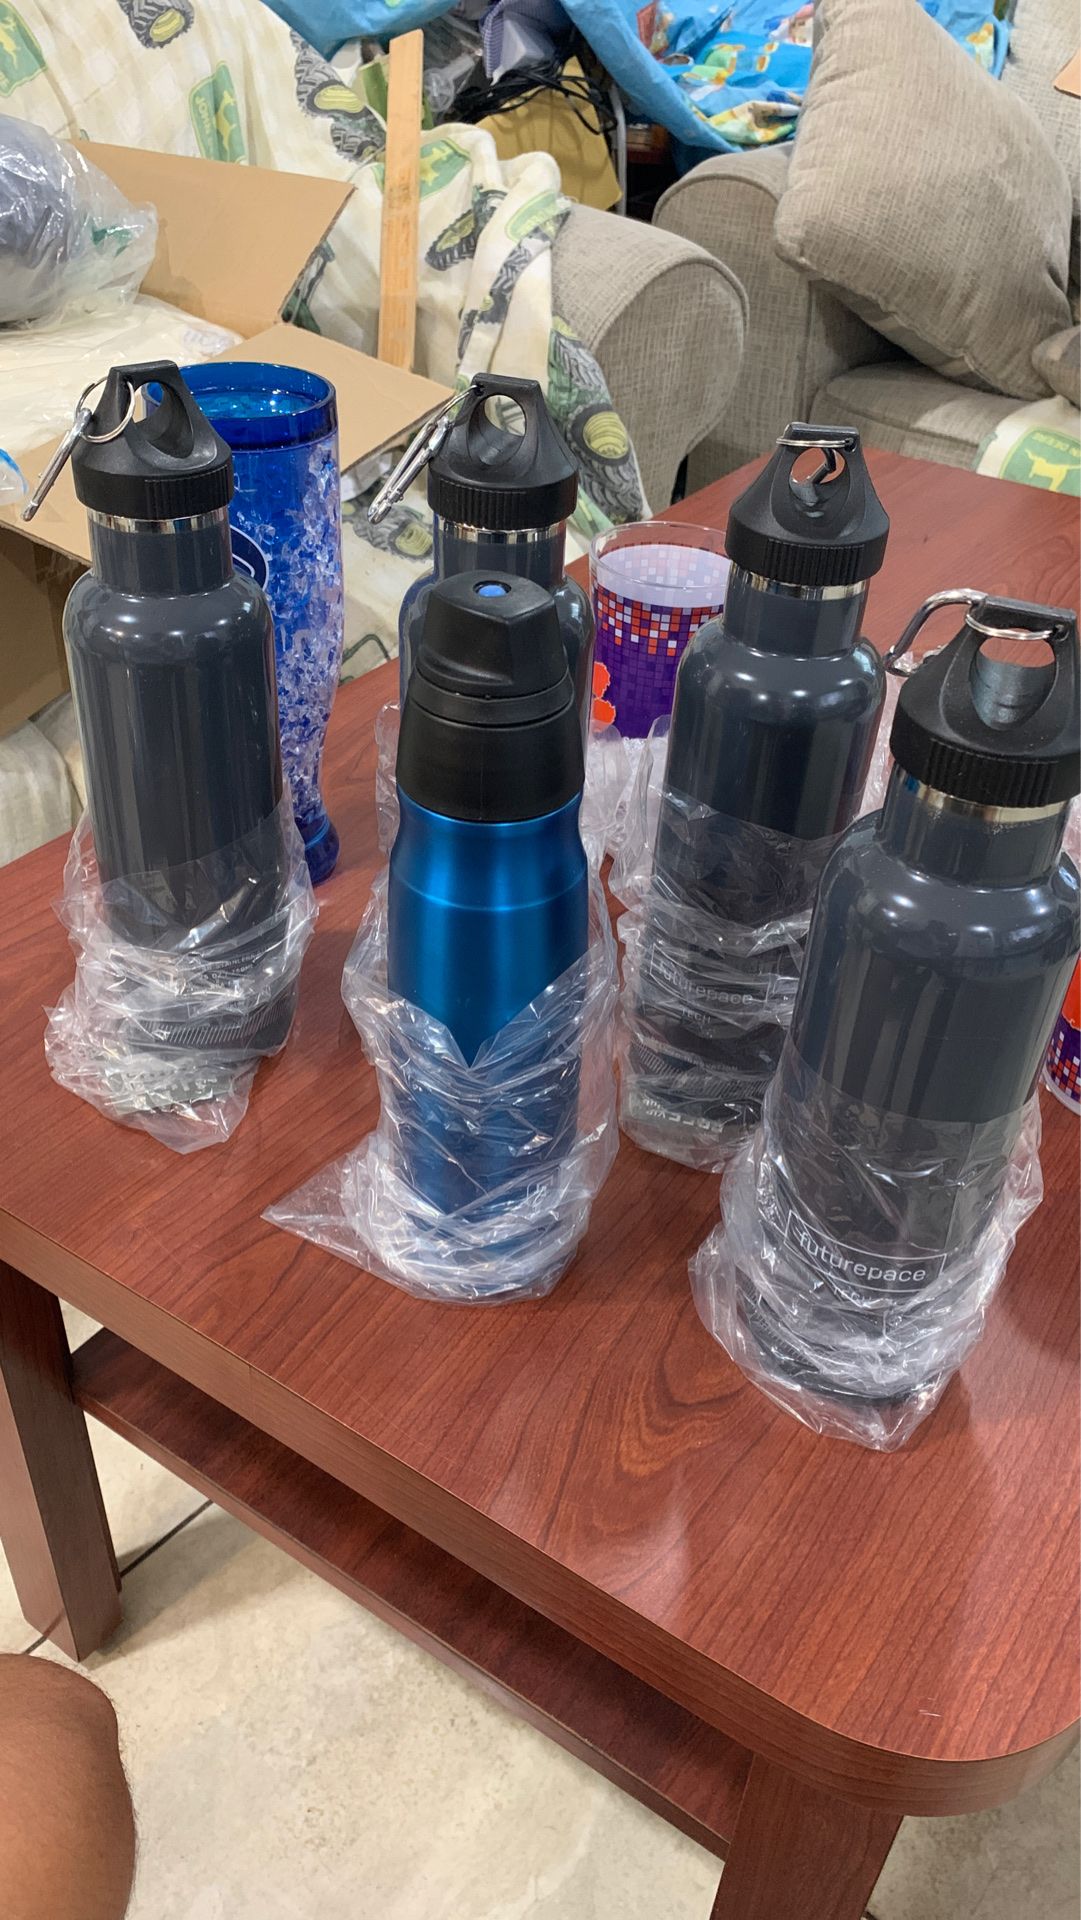 $5 insulated bottles and glass cups